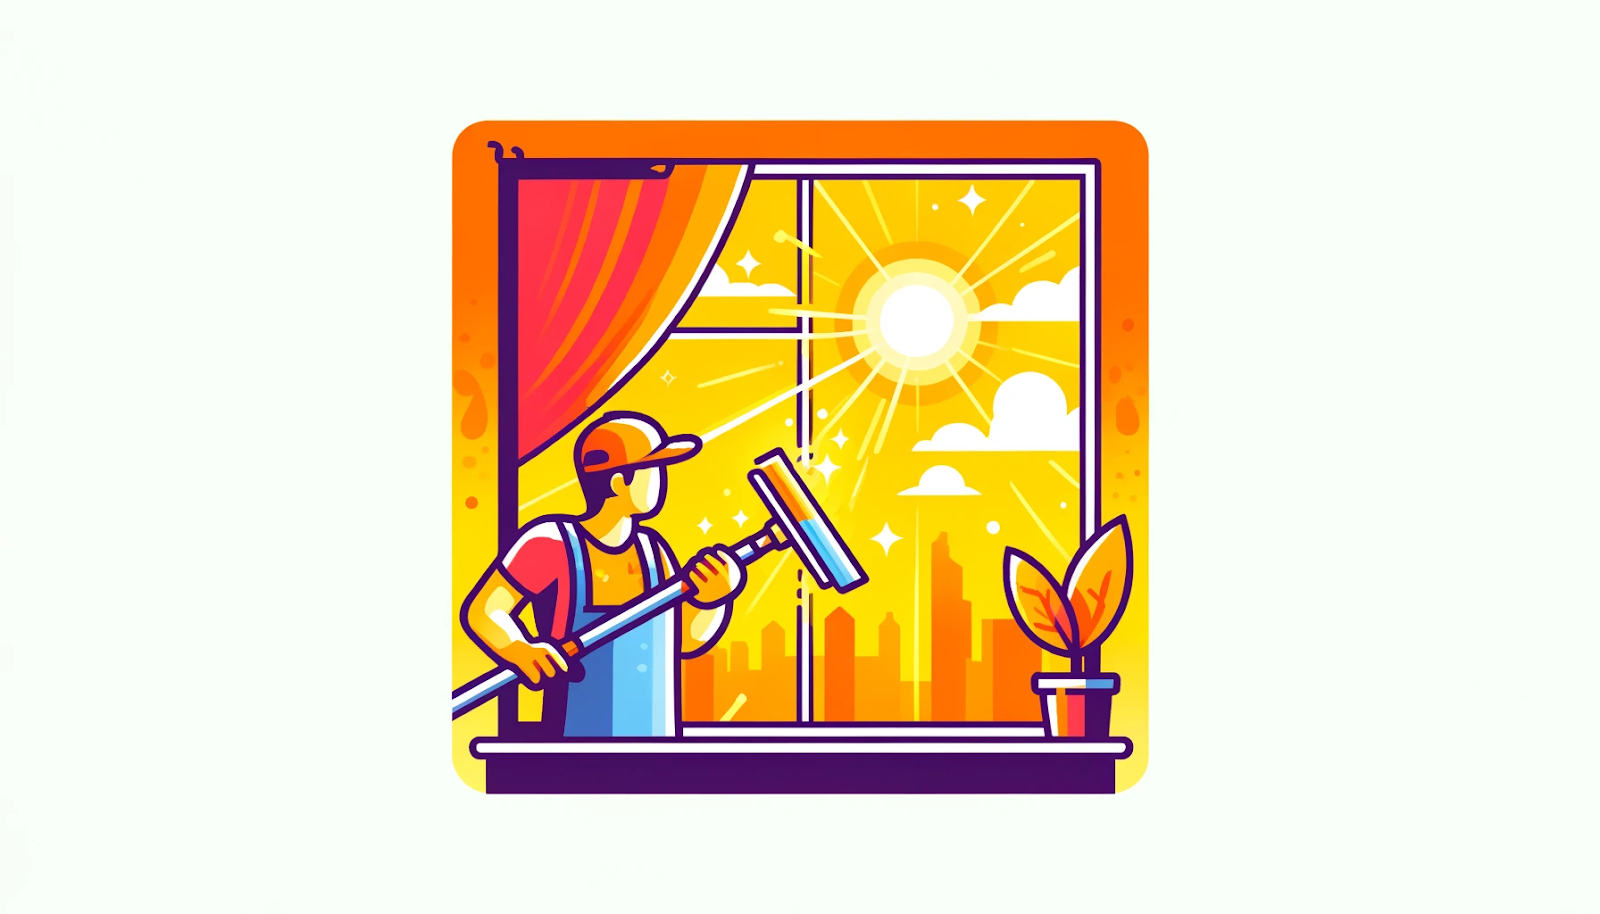 Illustration of window cleaning in summer. The image shows a person cleaning windows with bright sun and clear skies in the background. The color scheme is warm and sunny to represent the vibrancy of summer.